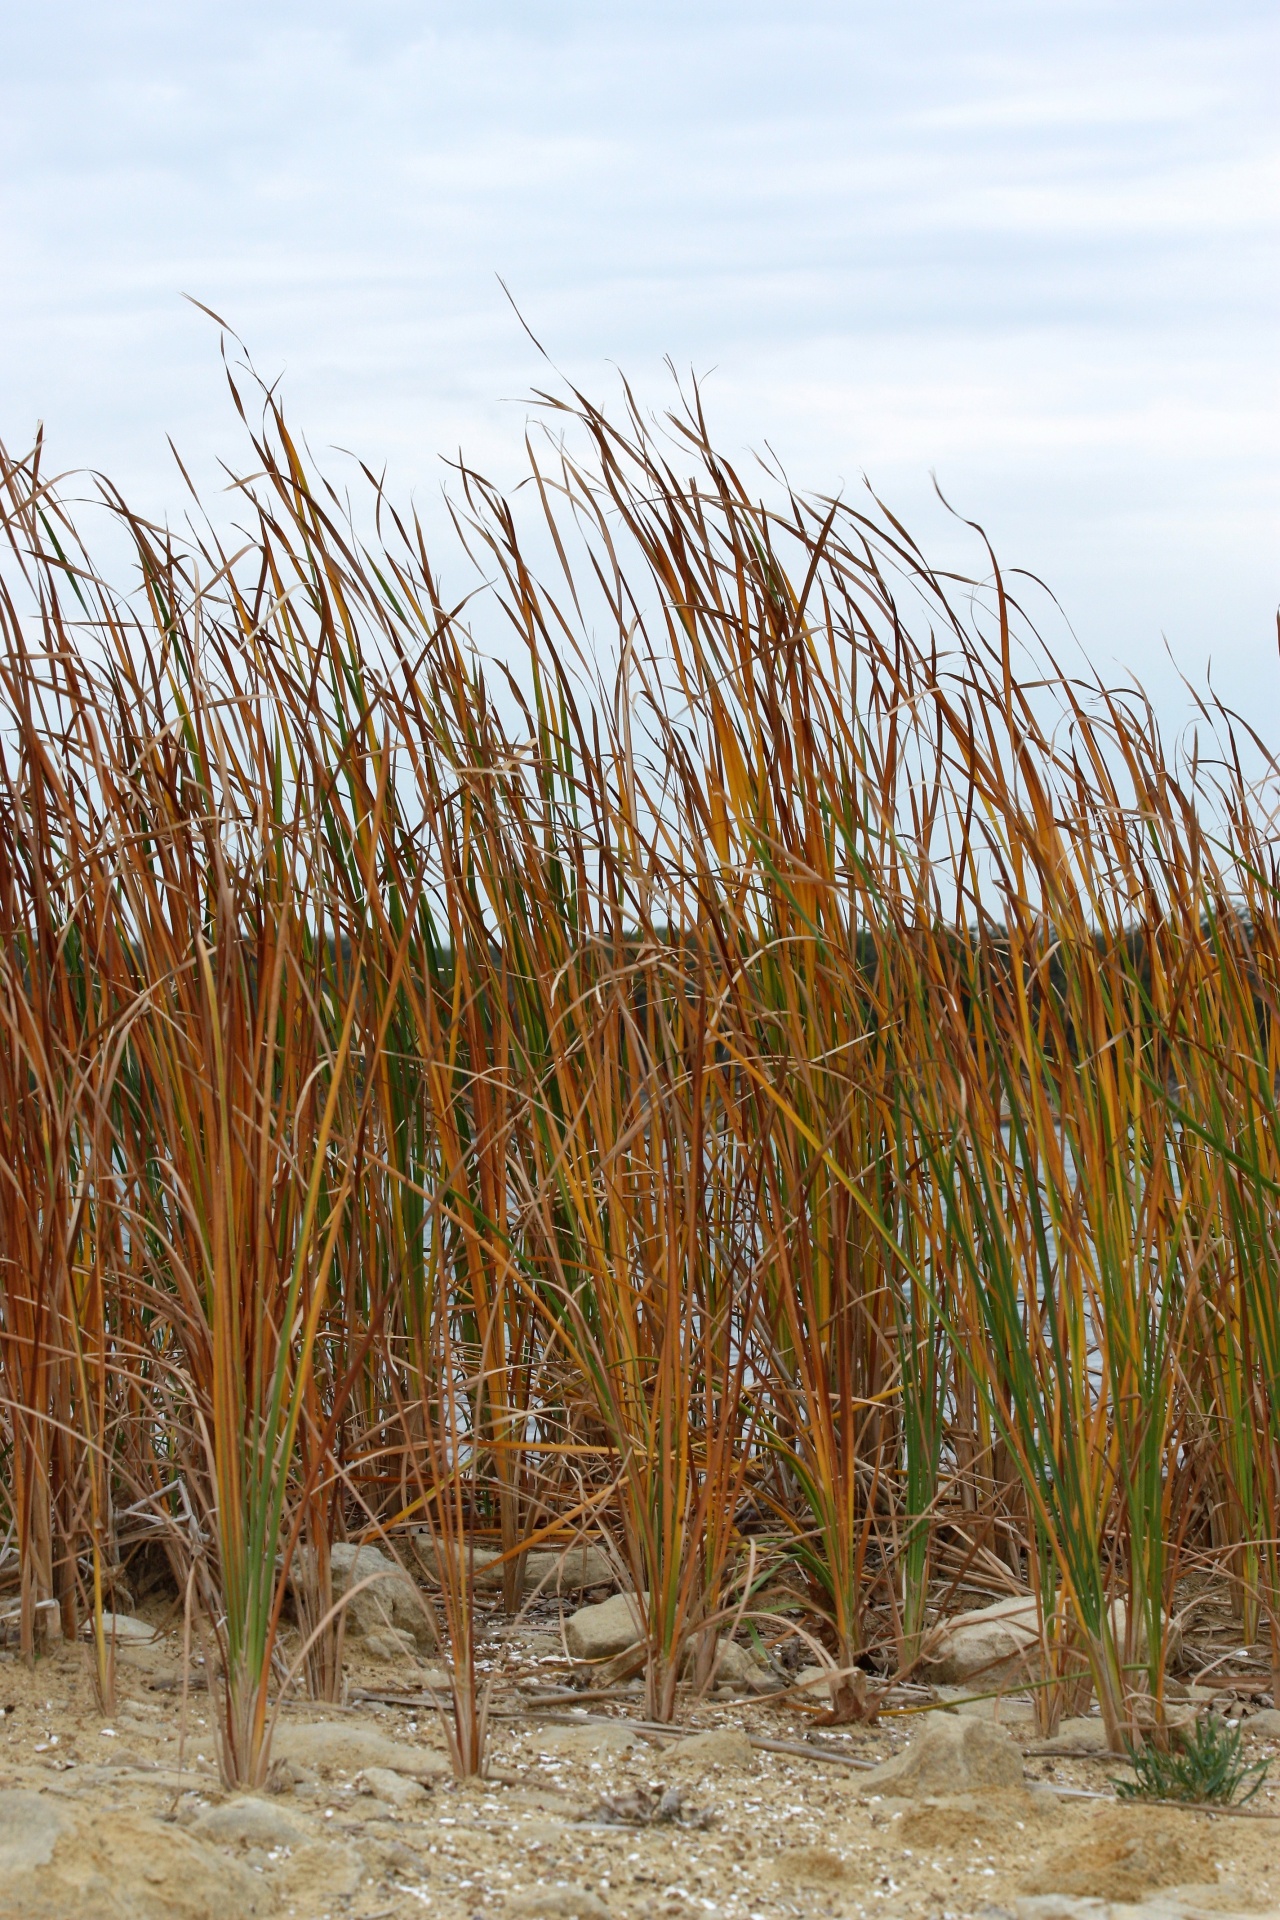 Gold and green cattails on a sandy beach on a cloudy autumn afternoon.